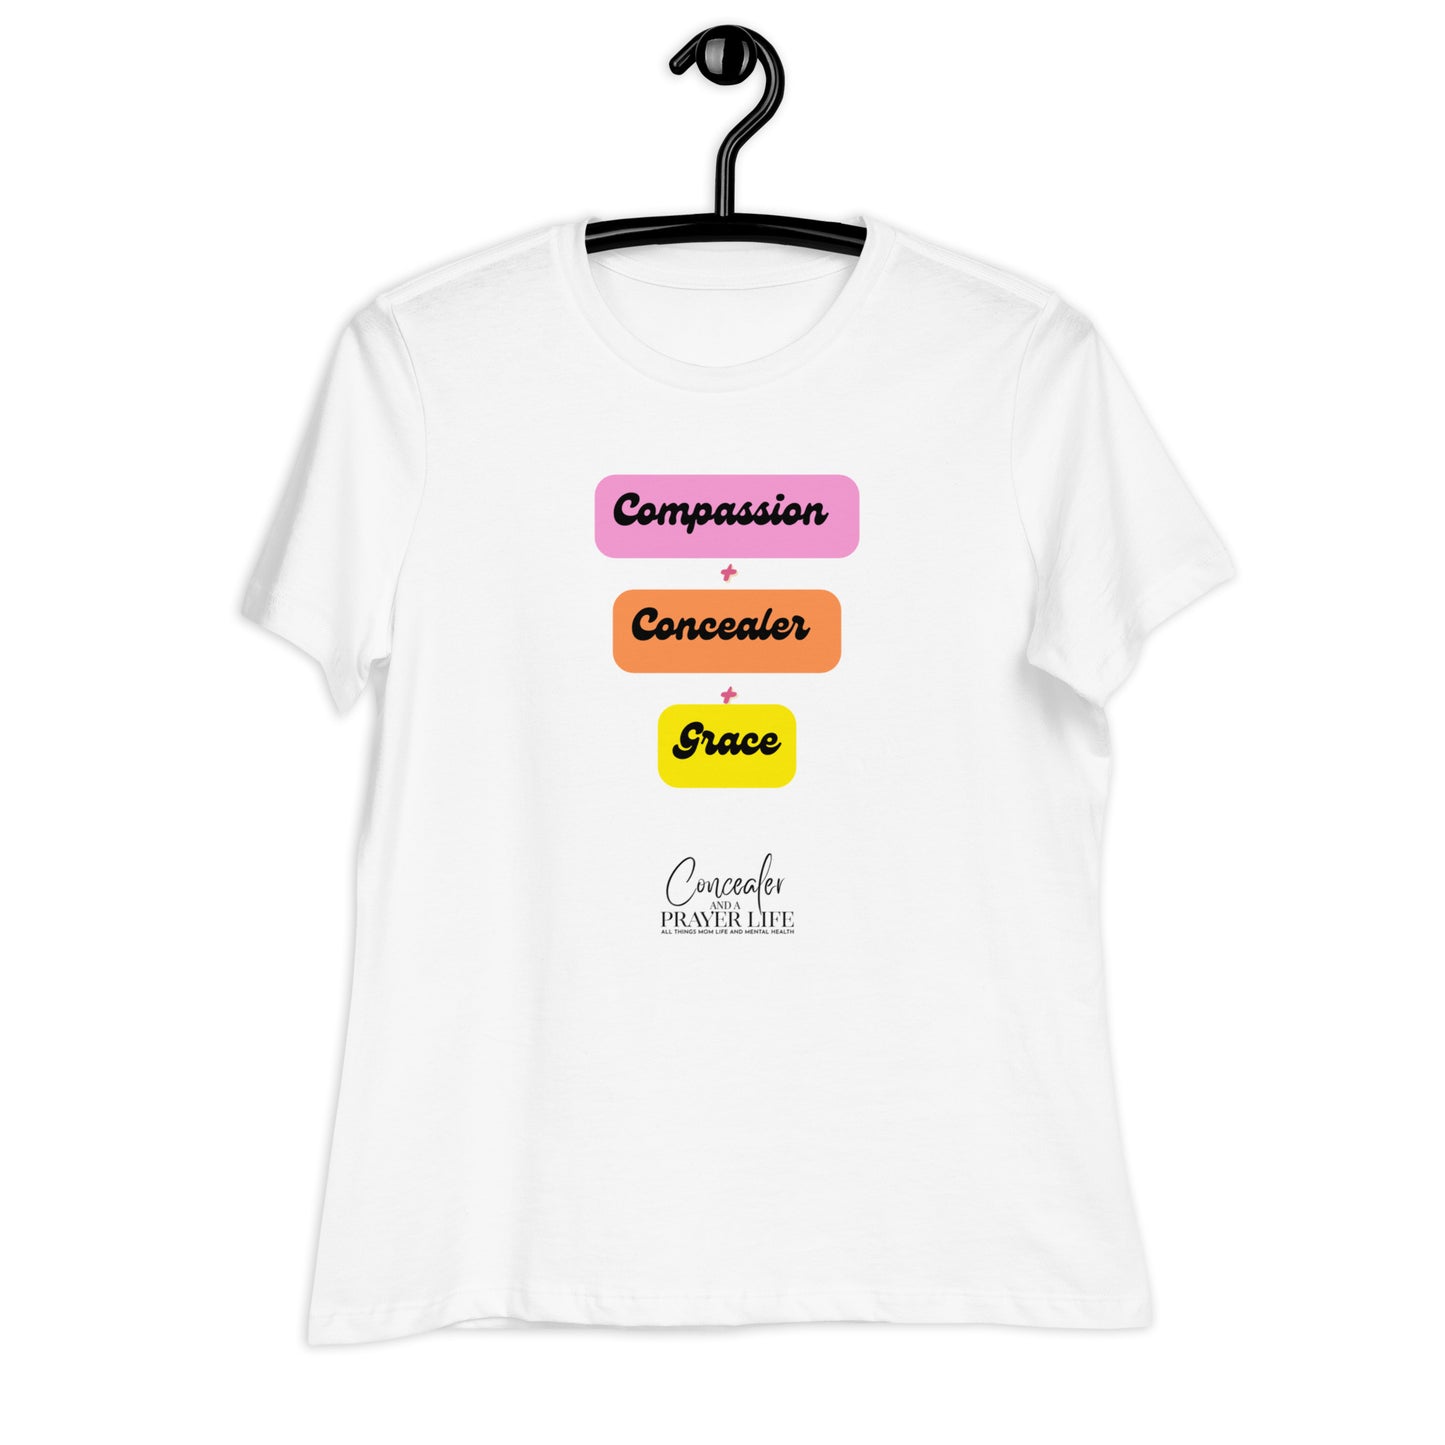 Compassion Tee - Colorful